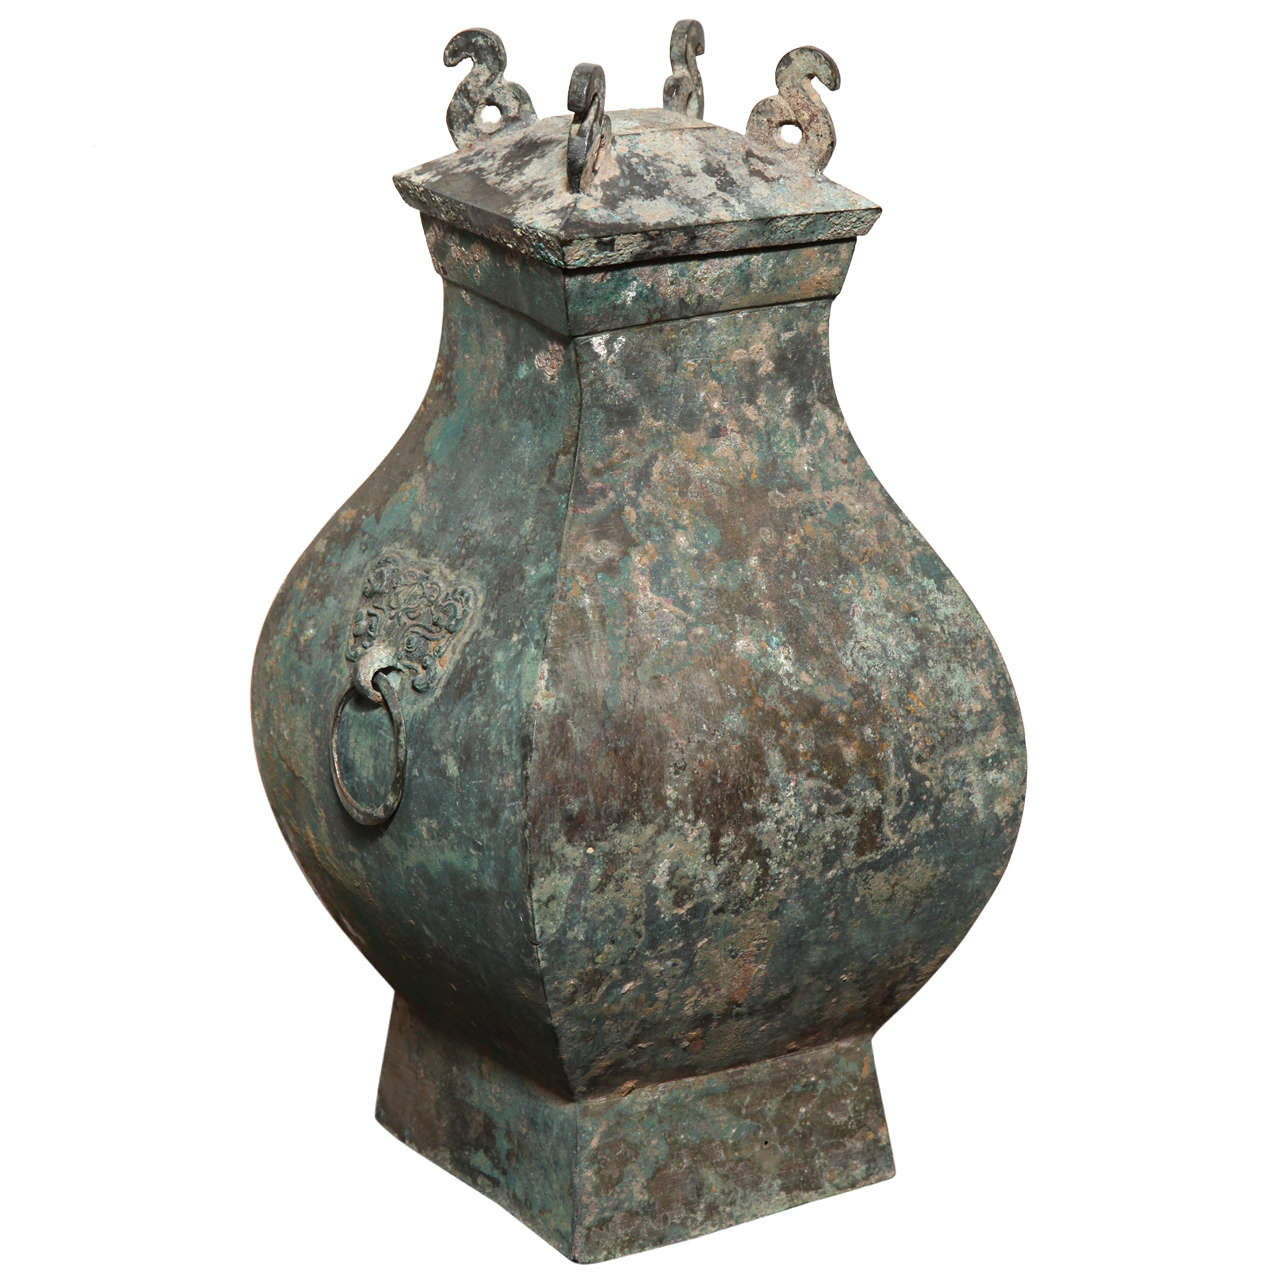 10 Unique Han Dynasty Vase Value 2024 free download han dynasty vase value of chinese han dynasty authentic bronze hu vase circa 200 bc at 1stdibs intended for chinese han dynasty bronze hu ceremonial vessel from 200 bc 200 ad with lid